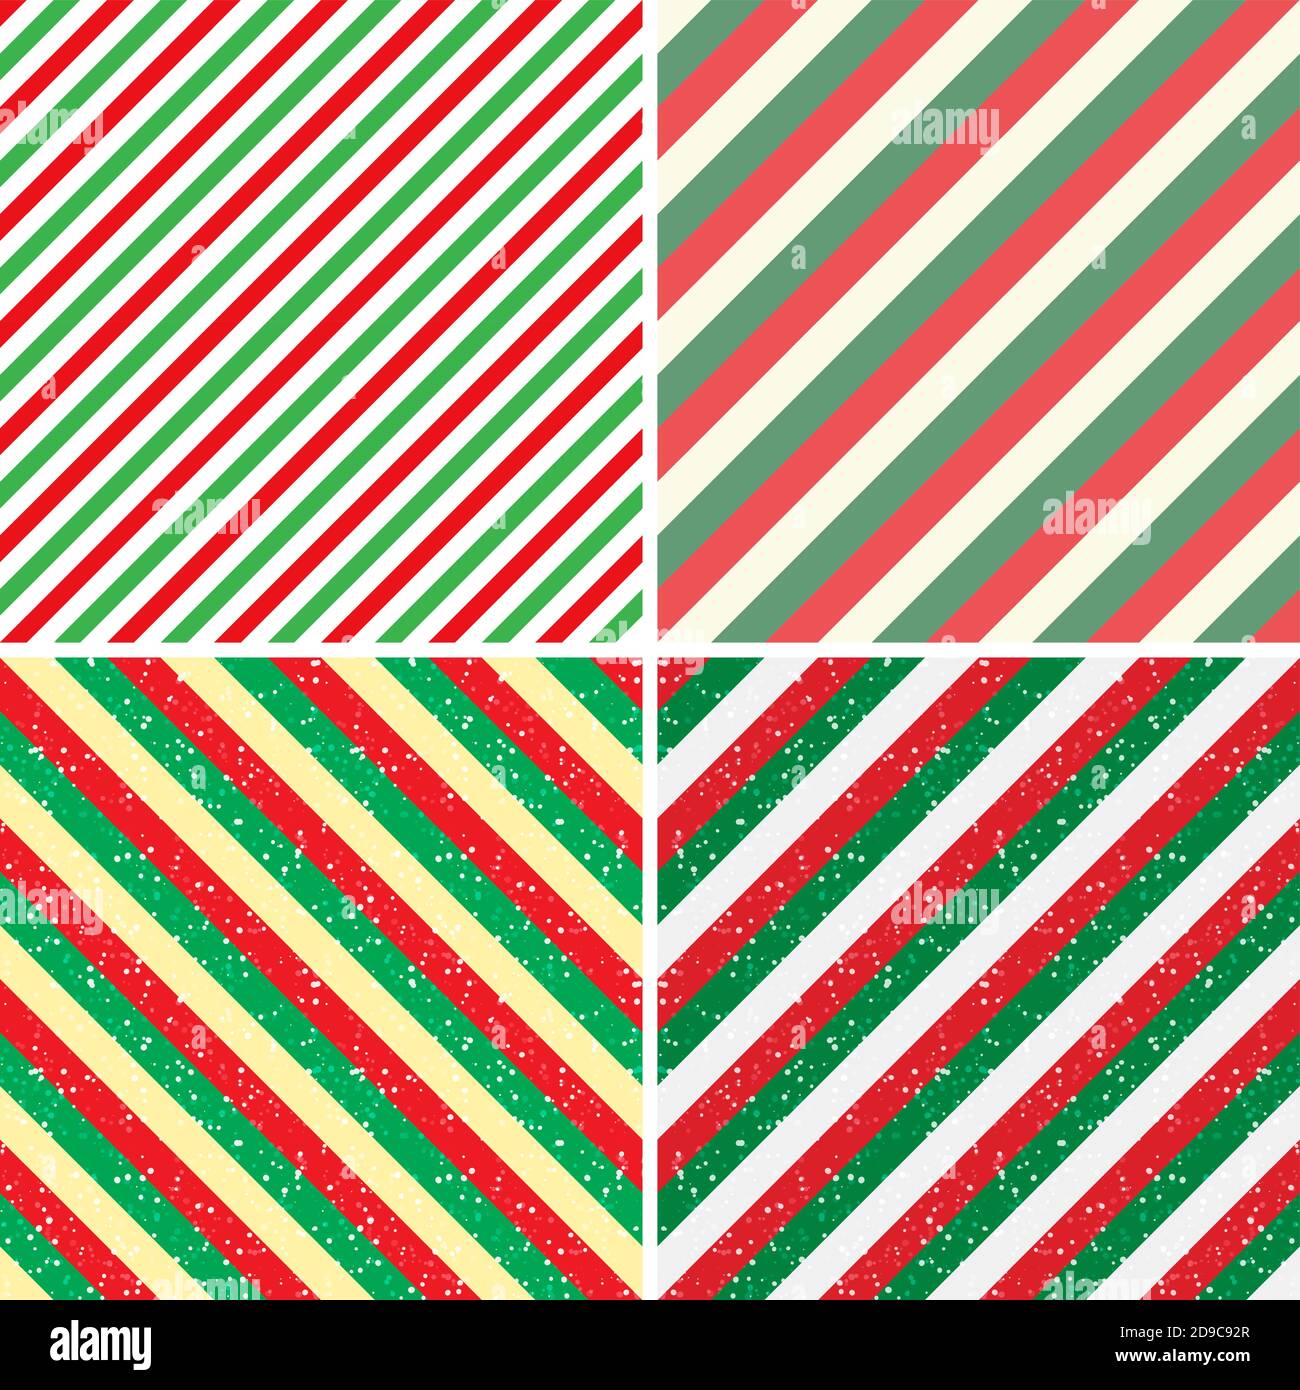 Christmas stripes backgrounds set. Vector collection of striped wallpaper. Seamless patterns with wrapping paper. Eps 10 xmas holiday backdrop illustr Stock Vector